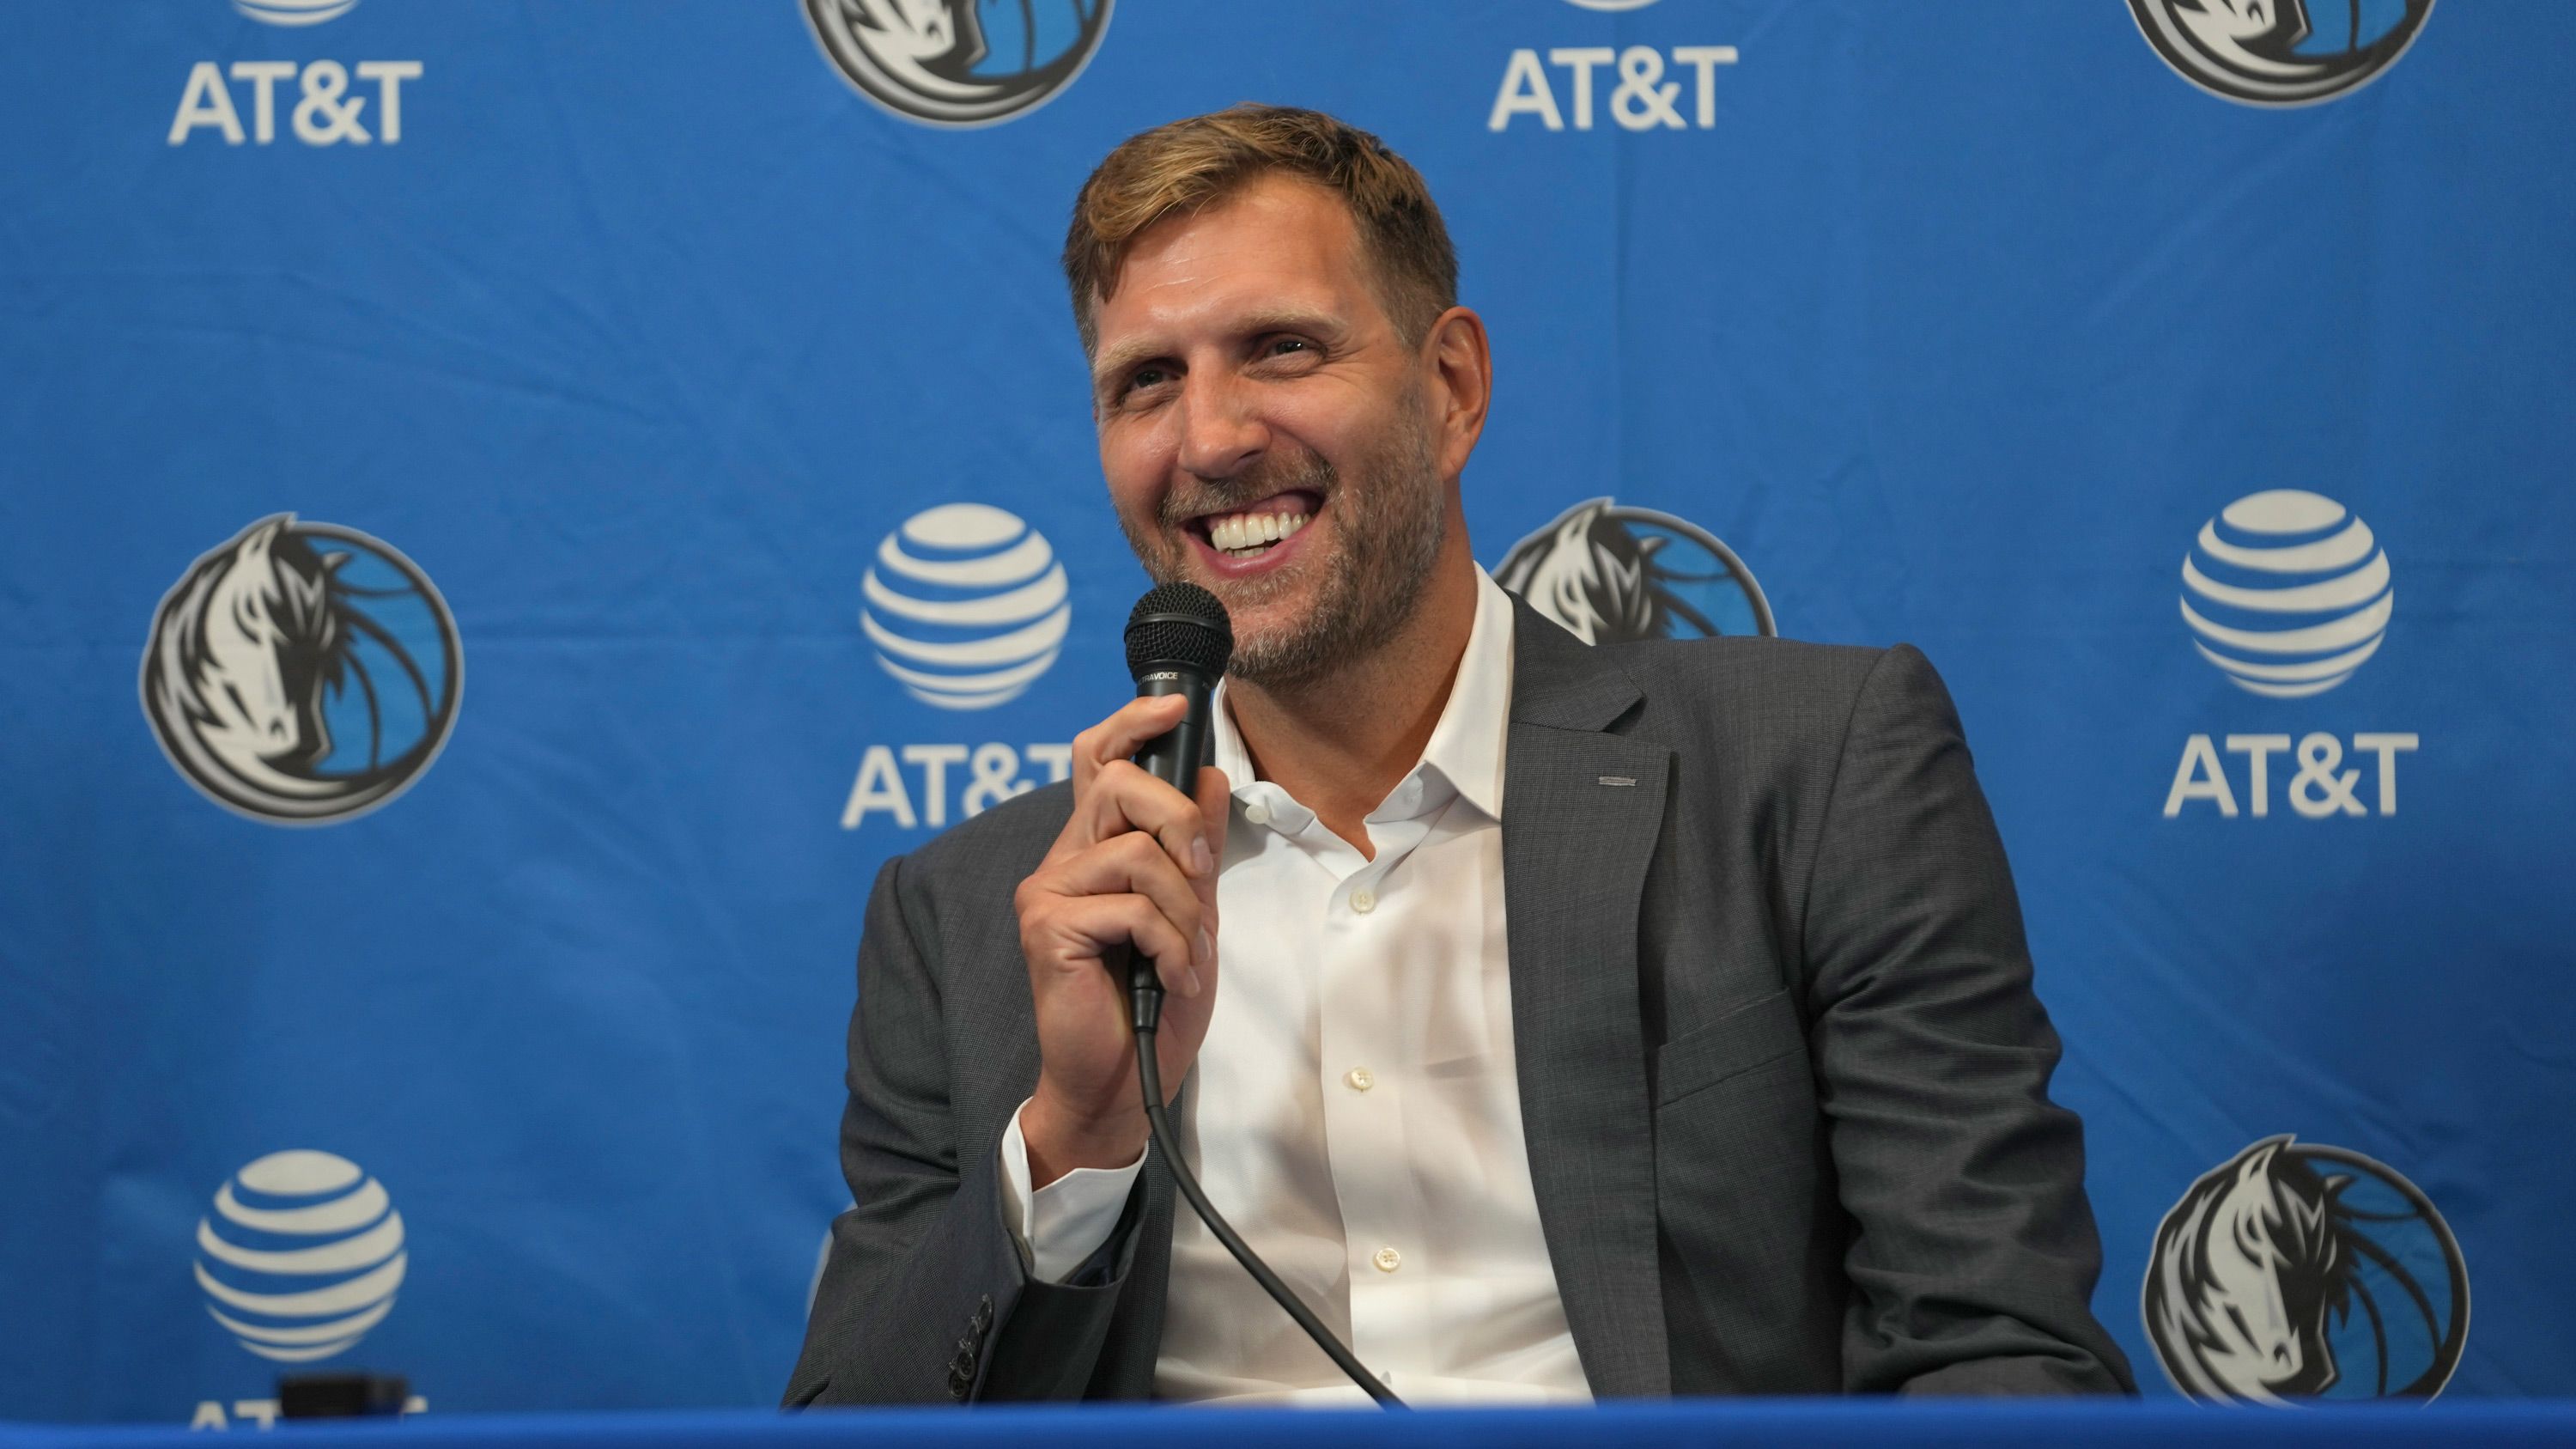 Dirk Nowitzki: On eve of Hall of Fame induction, NBA legend says his daughter is 'mostly embarrassed' about 'hoopla' surrounding her dad | CNN